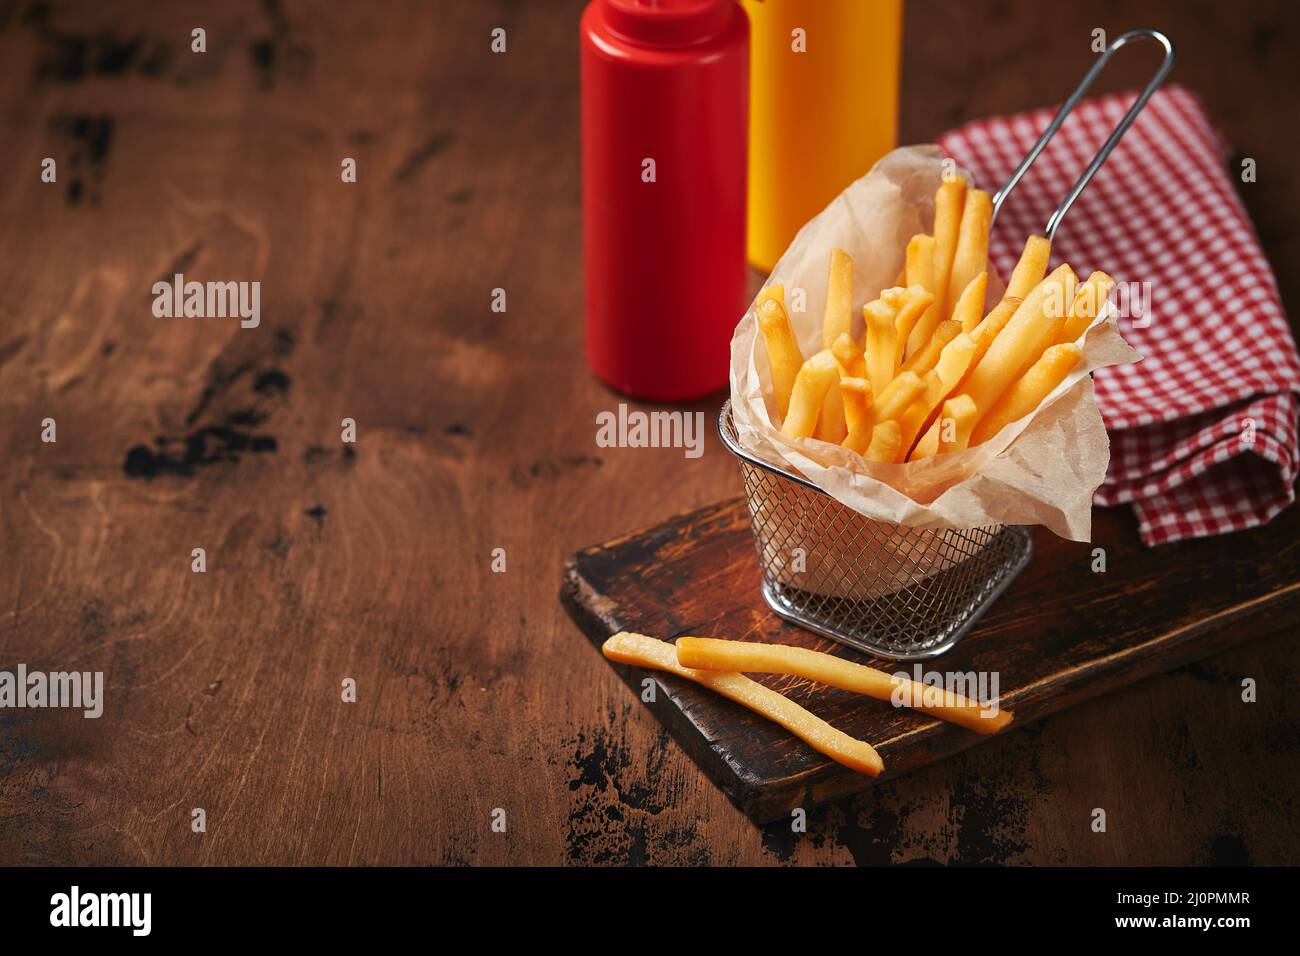 French fries in a metal mesh basket on a wooden board. Fast food concept, american food Stock Photo